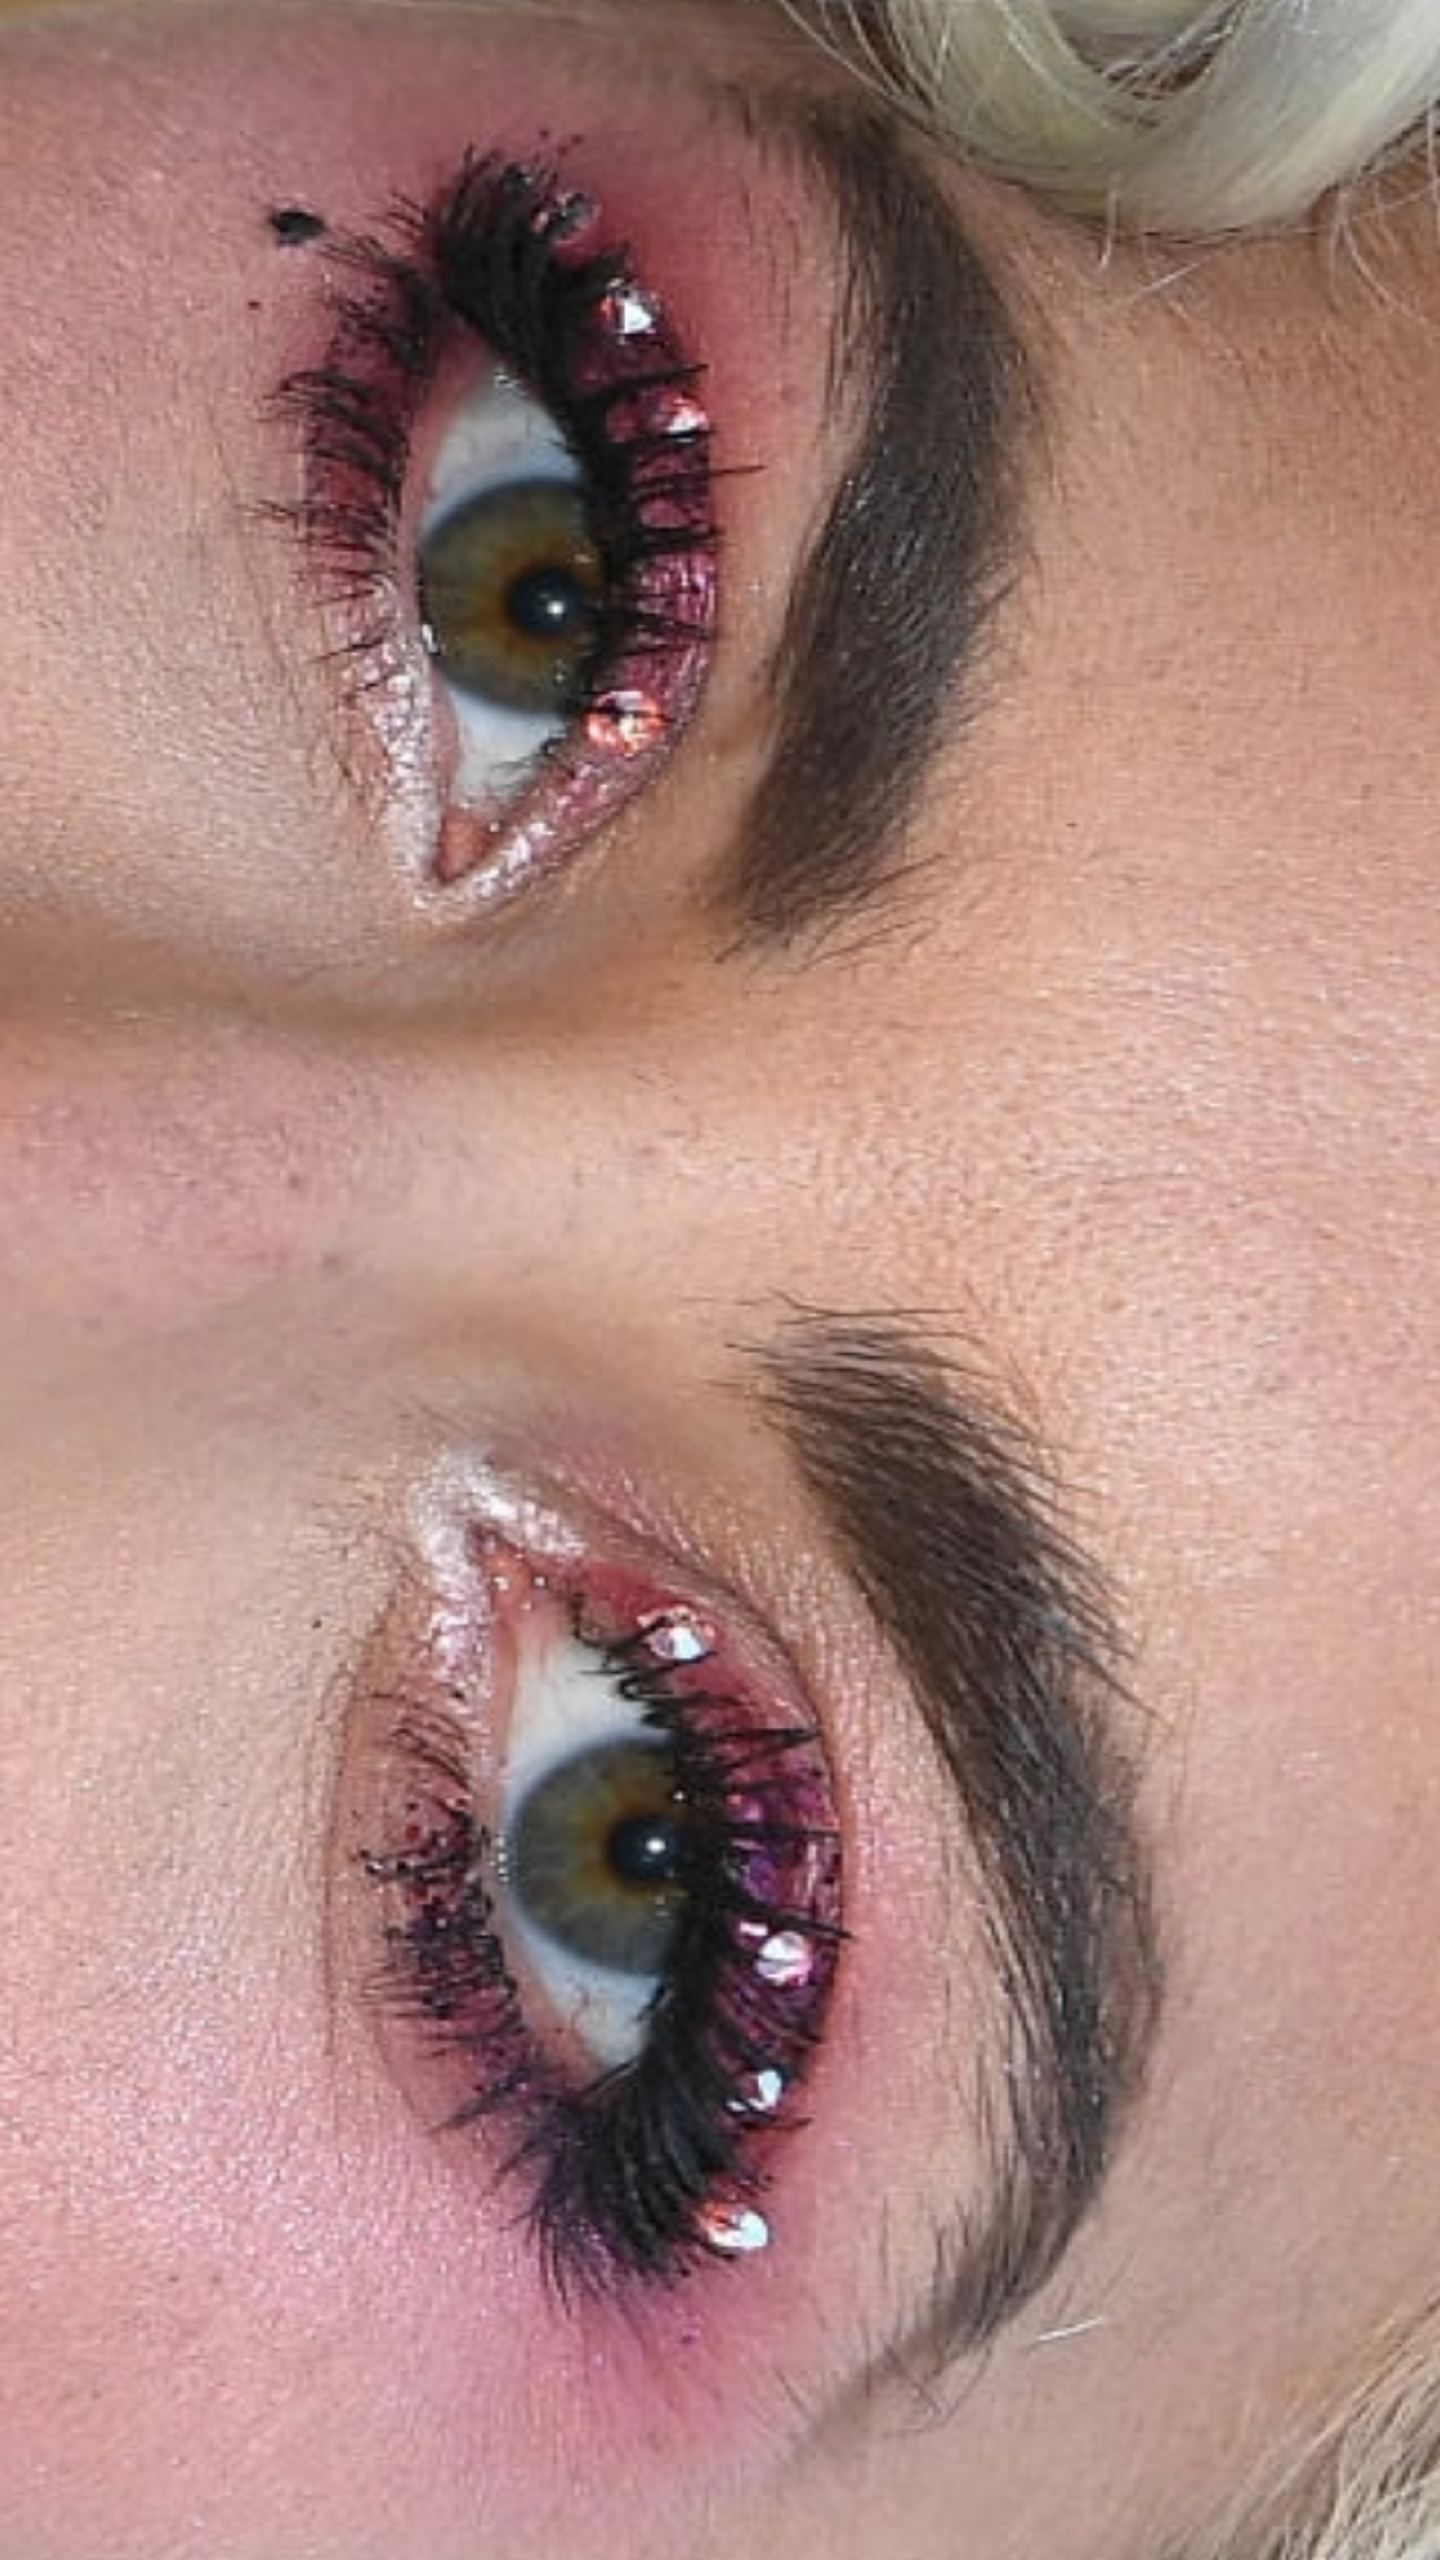 A close up of the eyes with makeup - Eyes